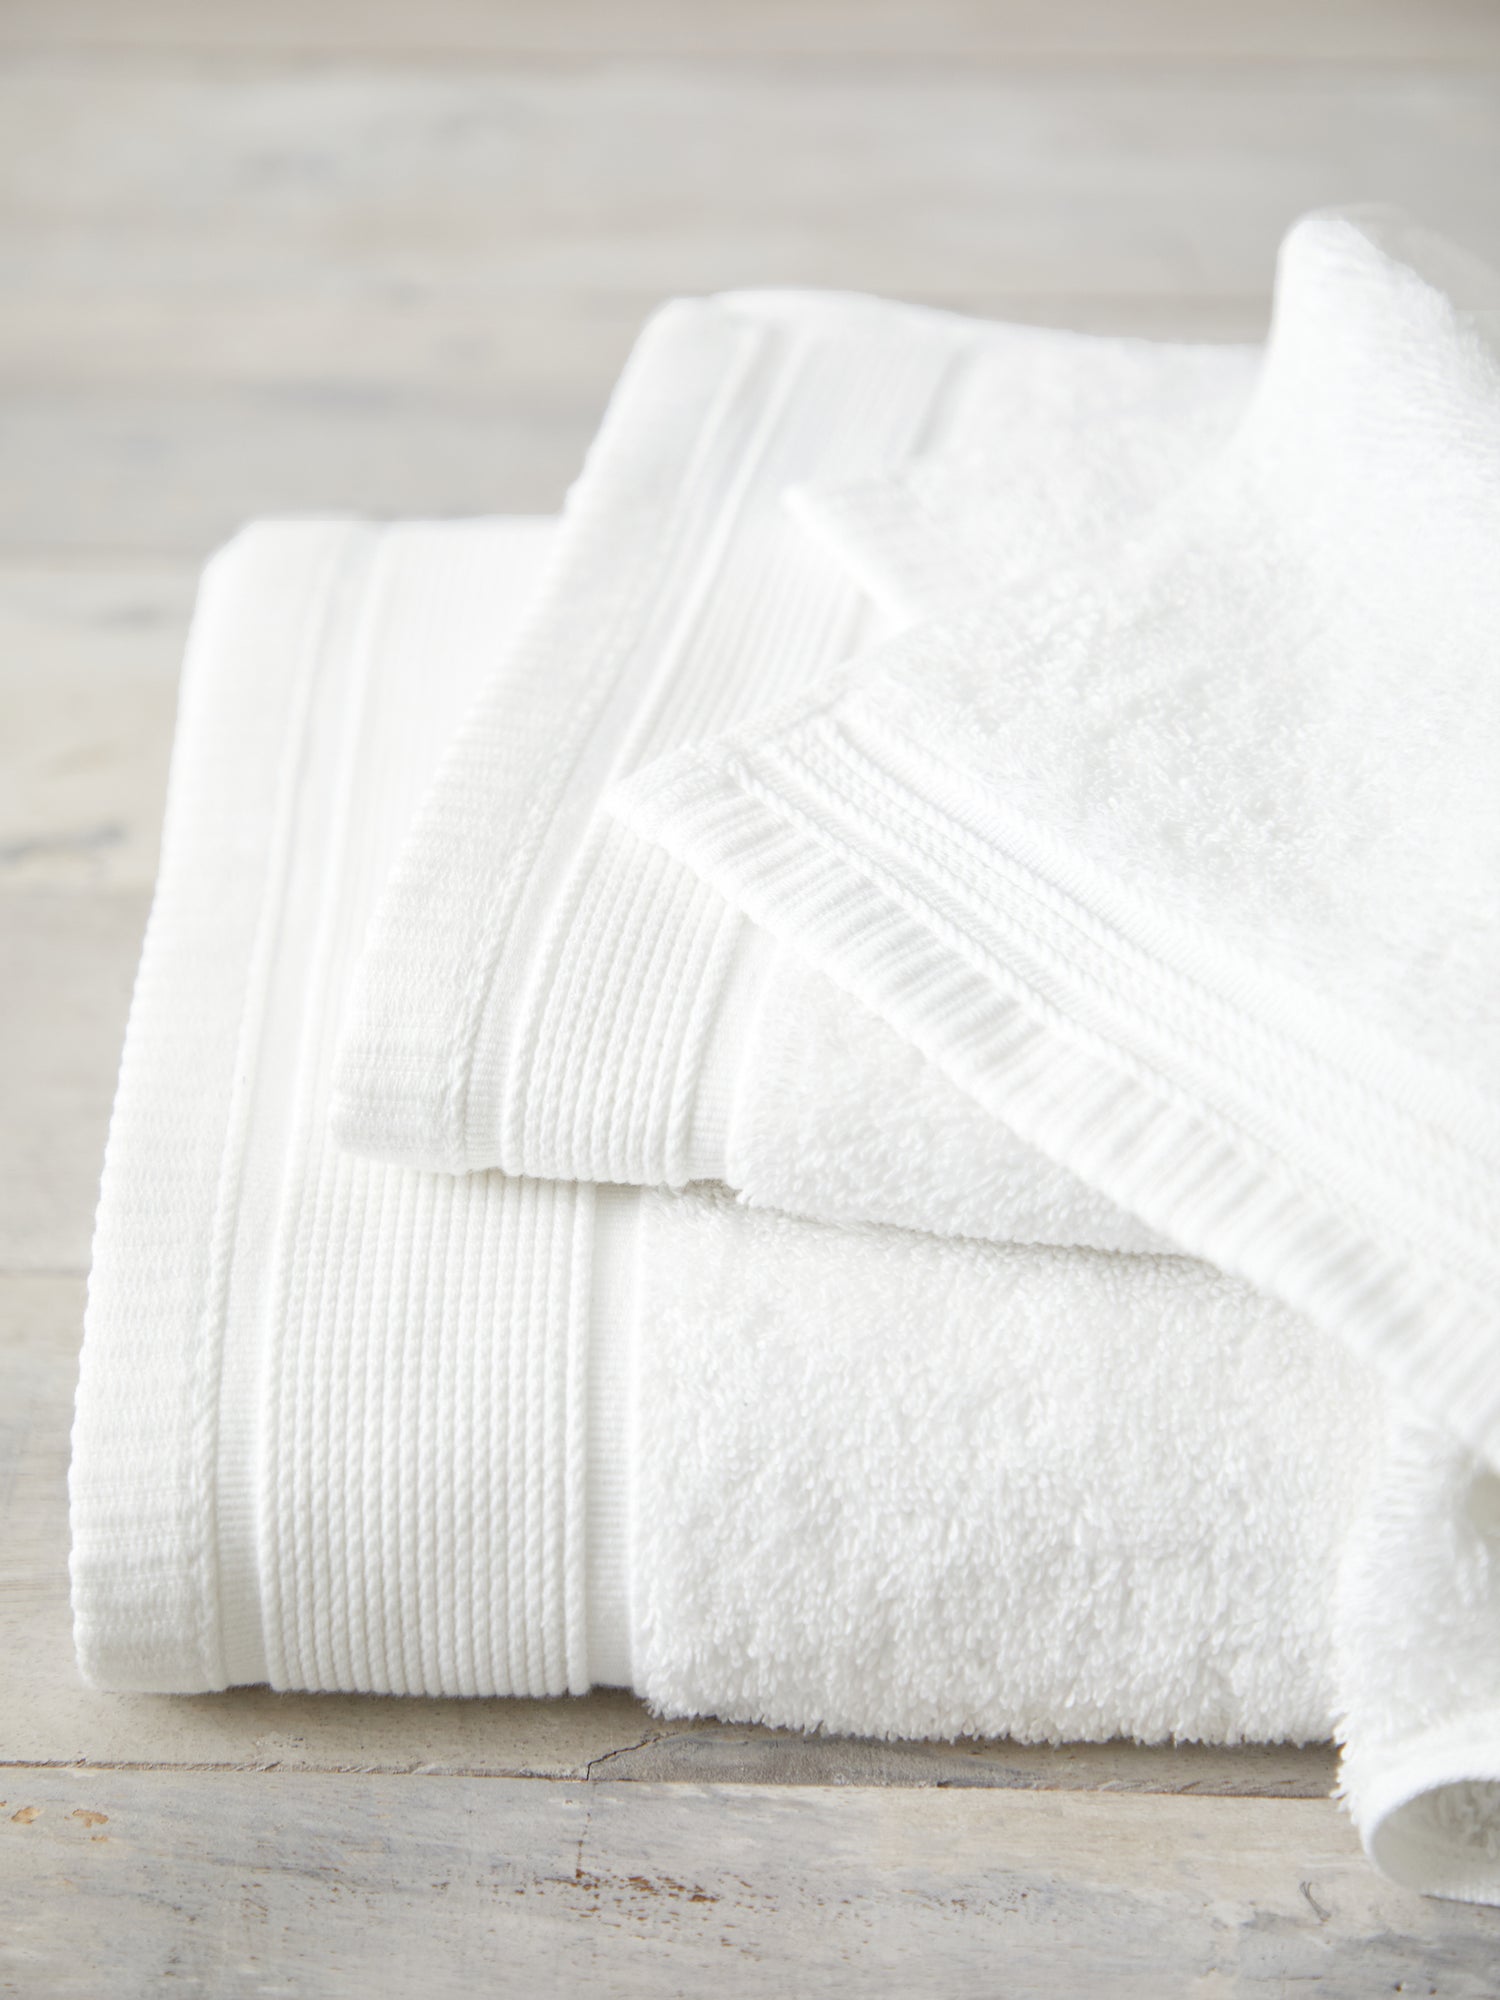 https://www.wallacecotton.com/content/products/oasis-bath-towel-white-3-4435.jpg?width=1500